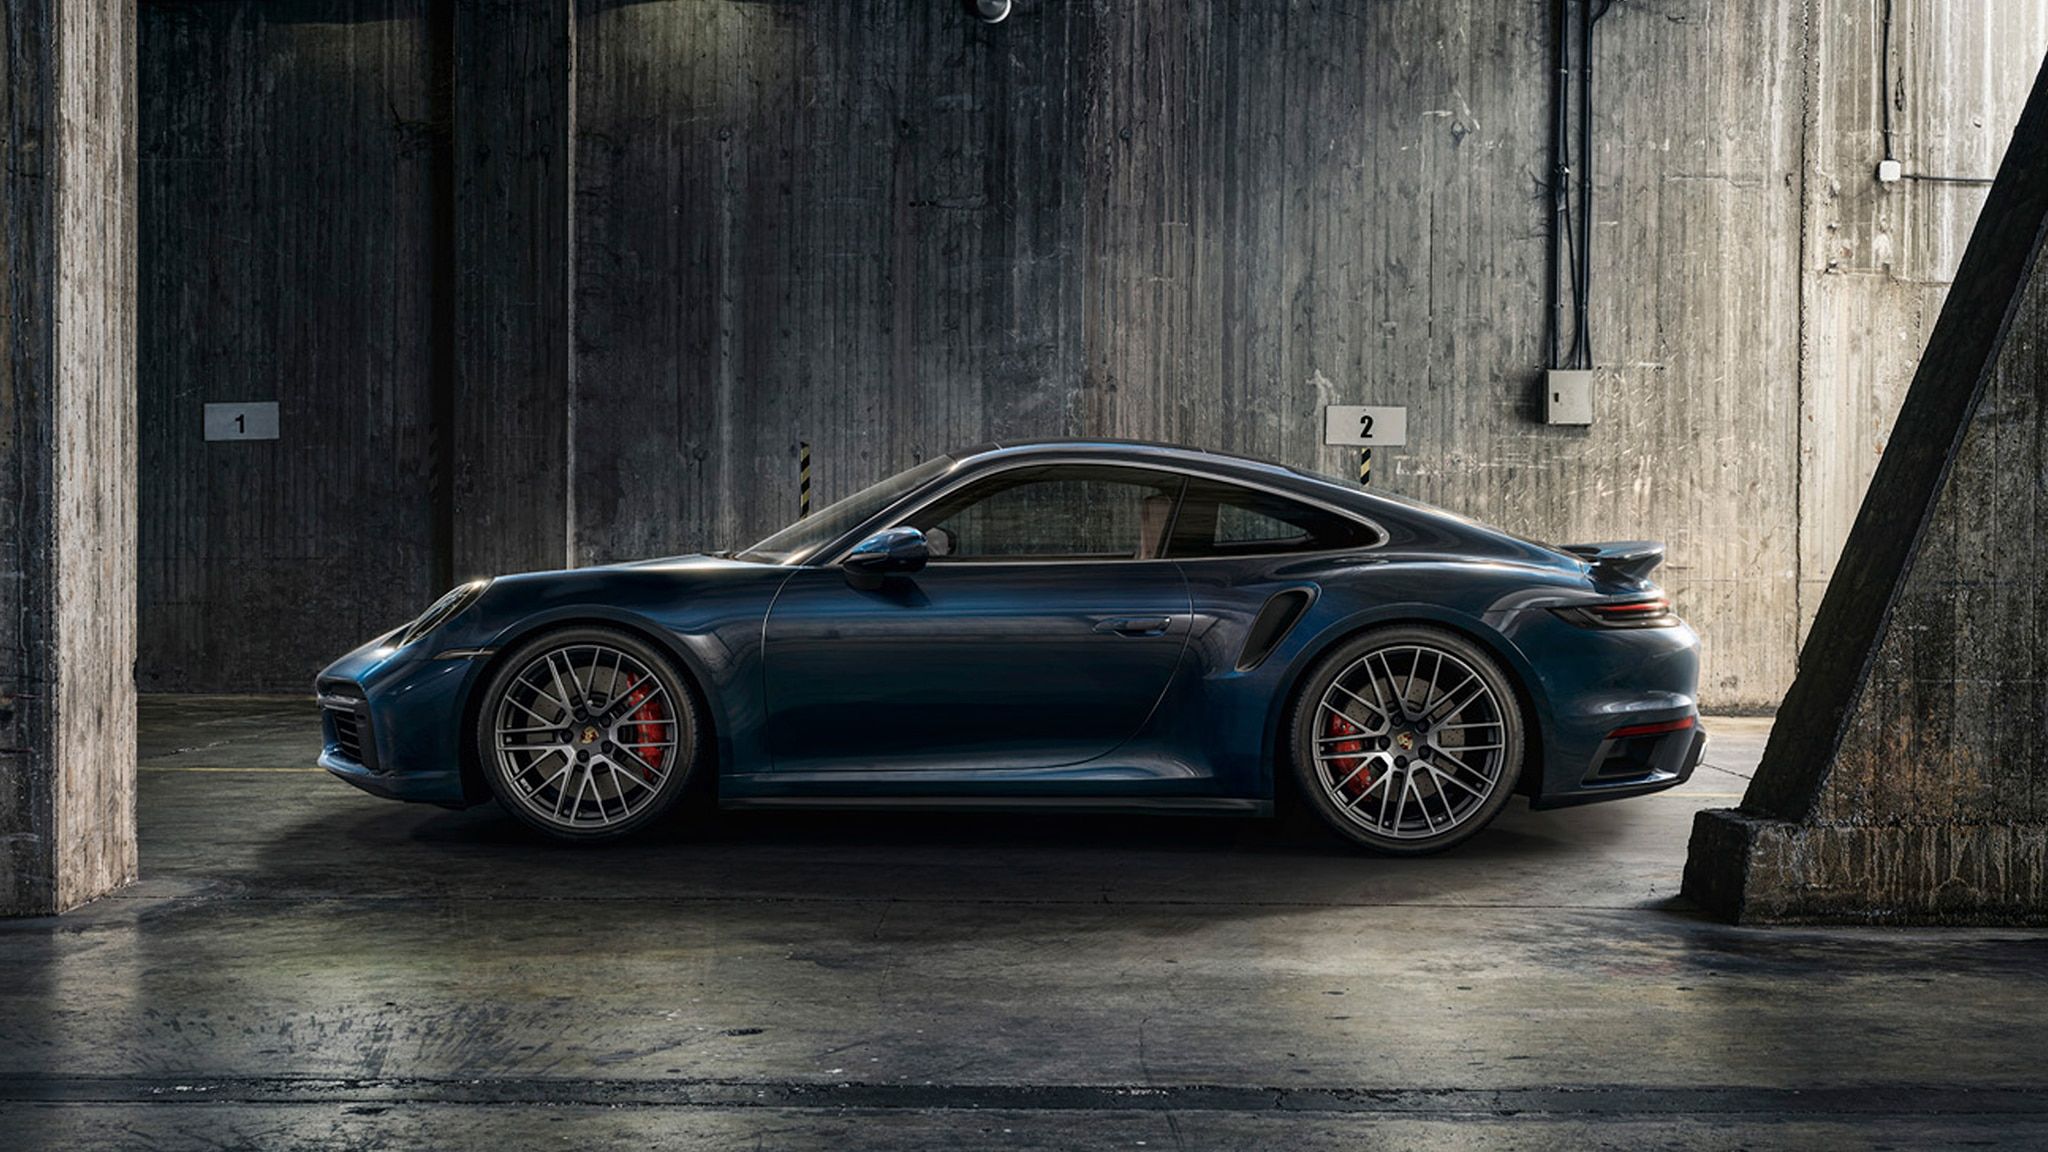 The New 2021 Porsche 911 Turbo is Quicker than the Old 911 Turbo S